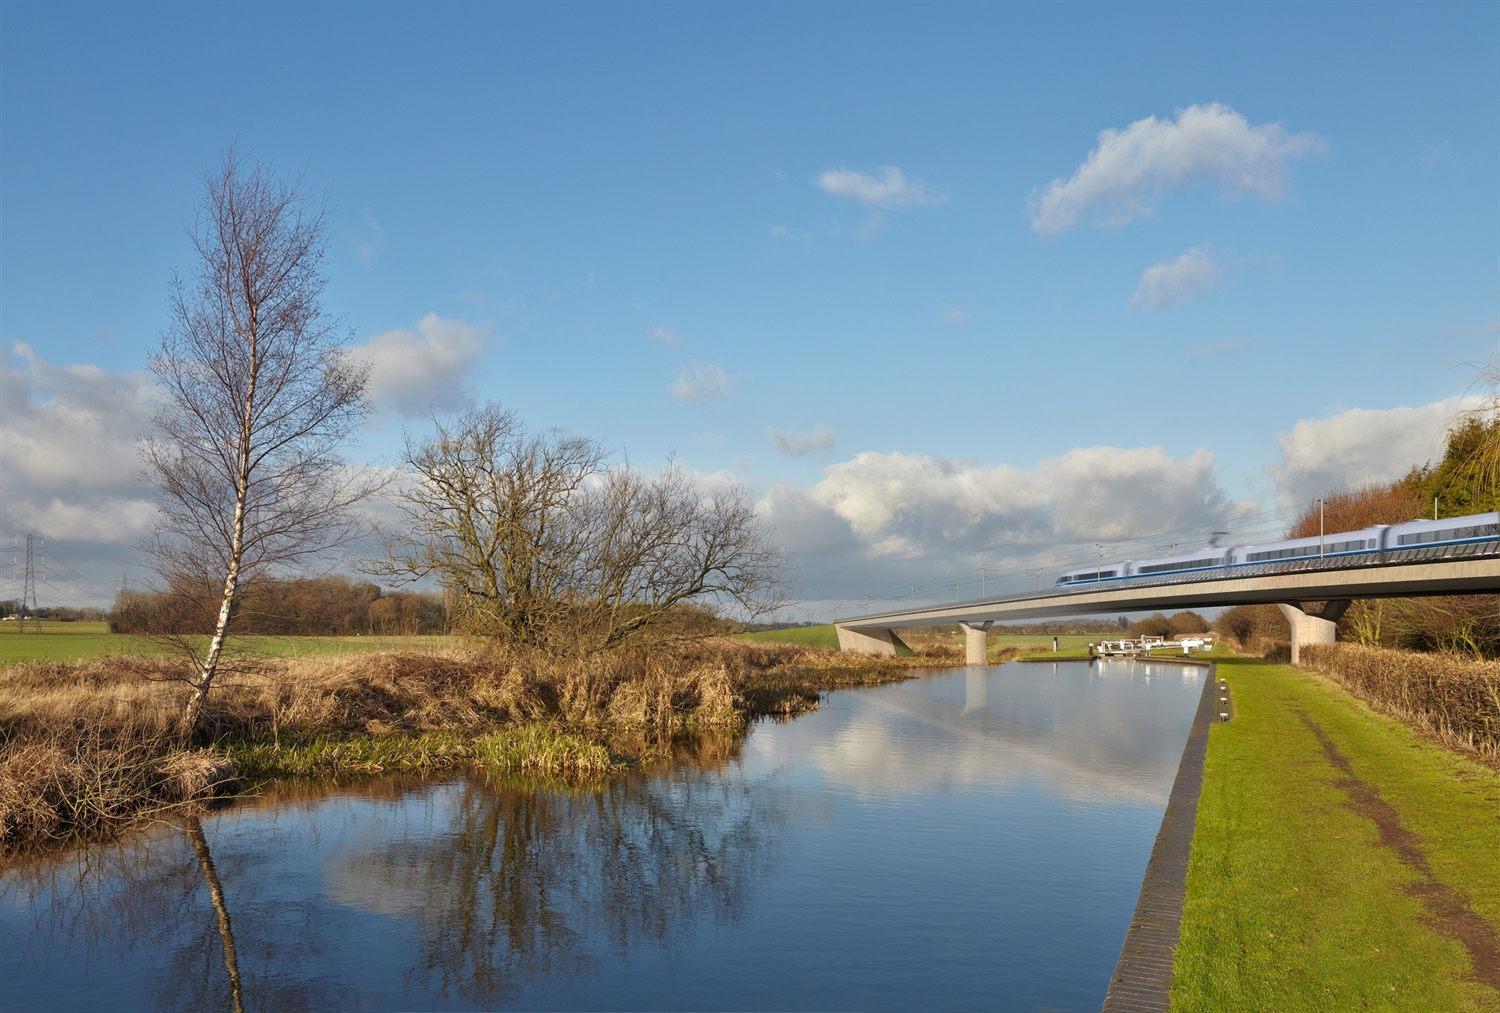 HS2 seeks phase 1 class approval for building works